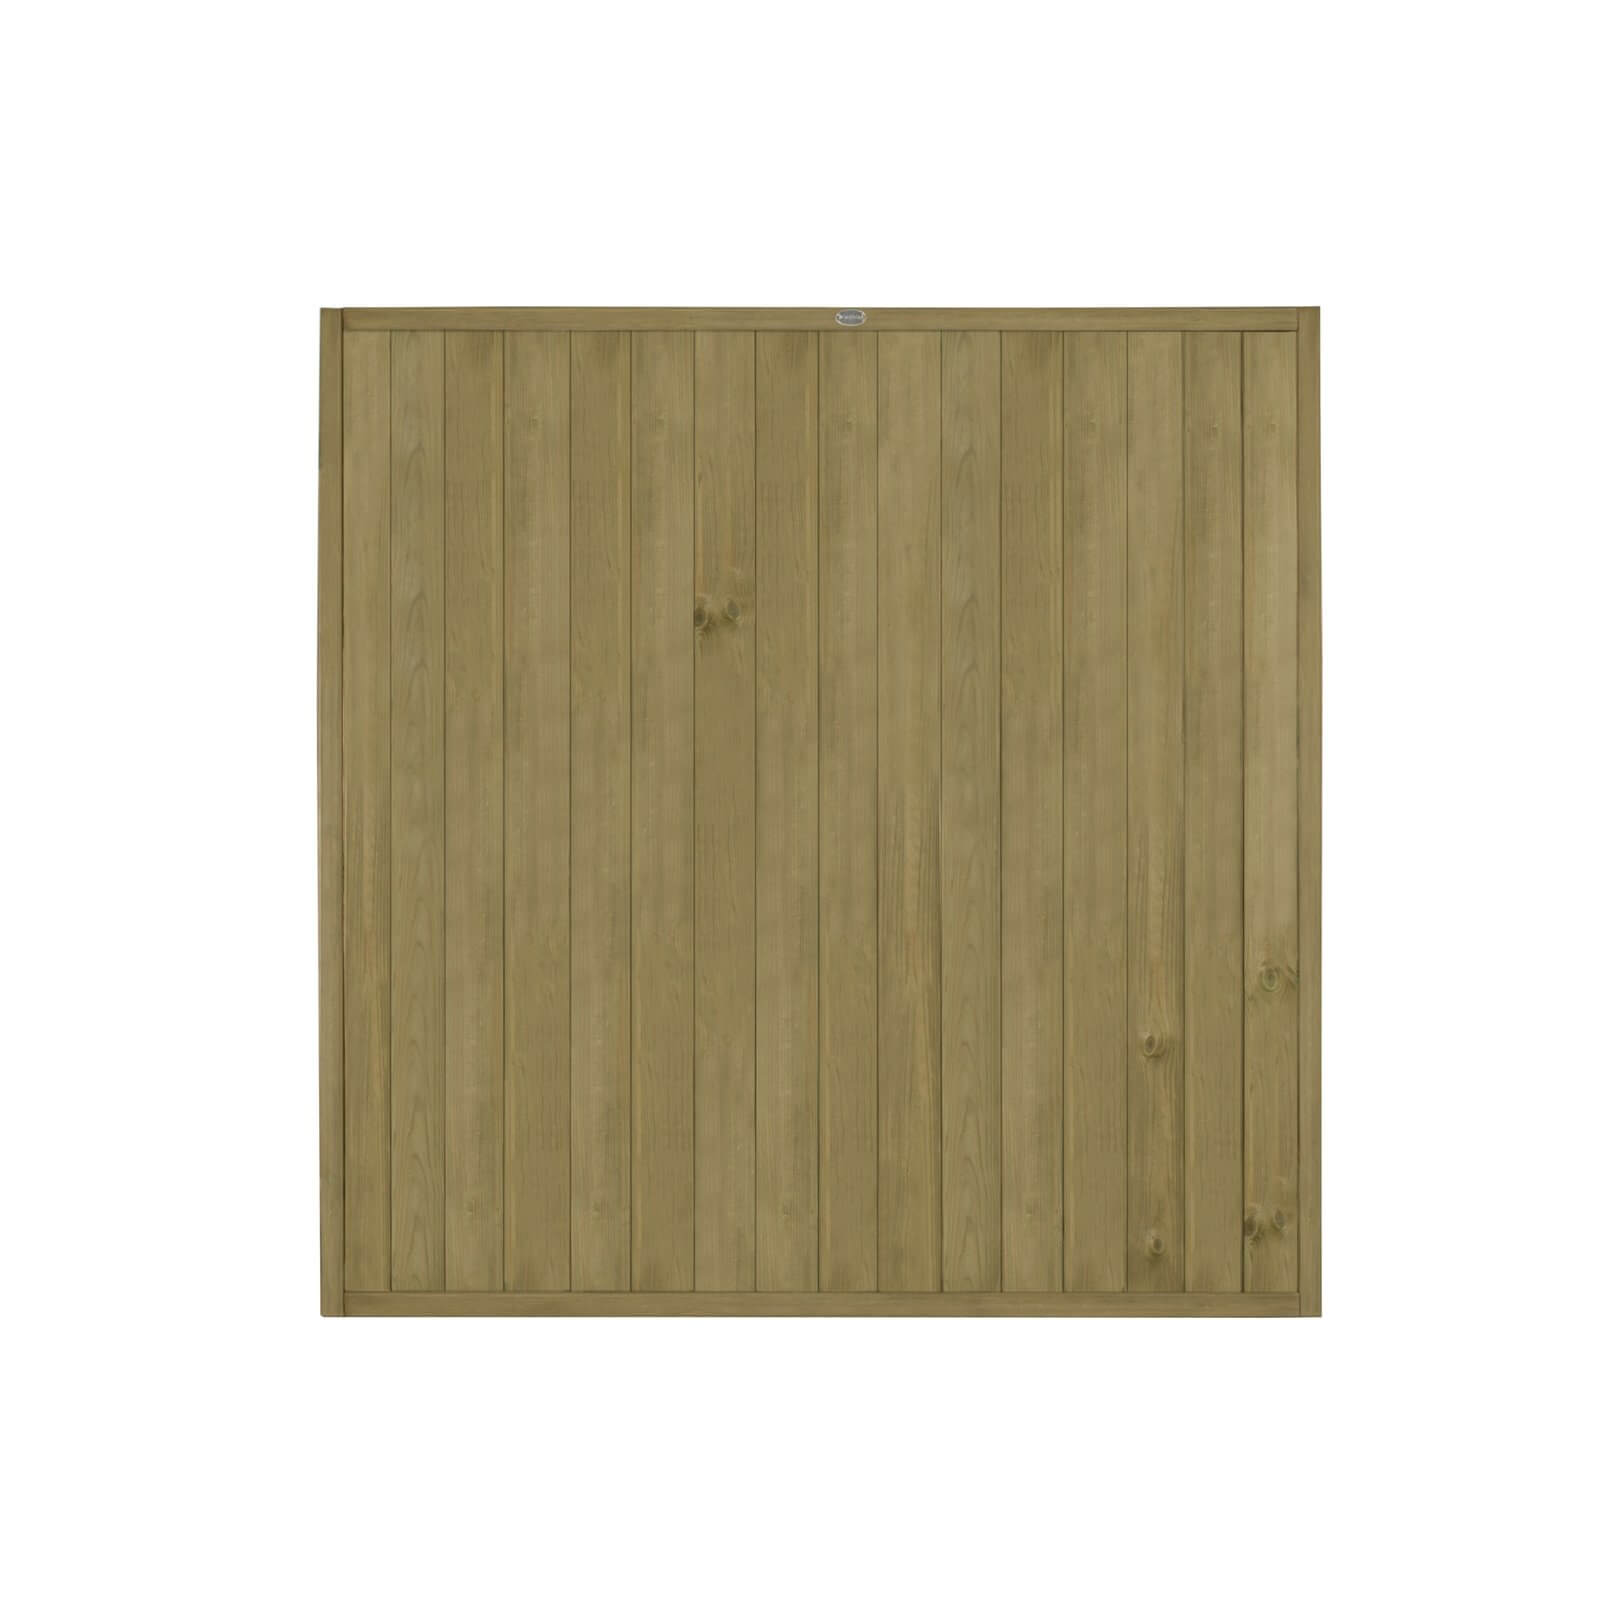 Forest Vertical Tongue & Groove Fence Panel - 6ft - Pack of 4